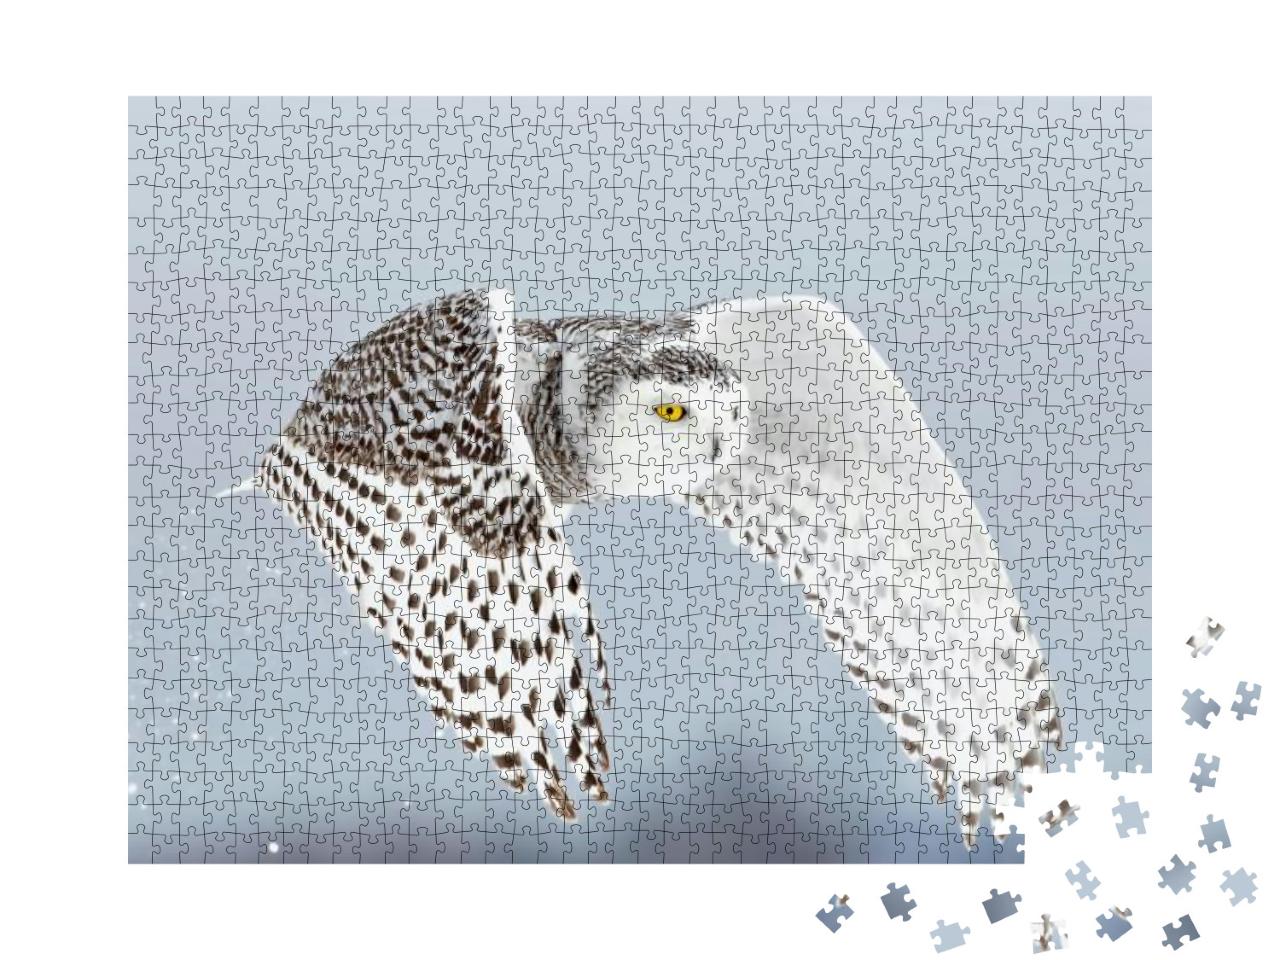 Snowy Owl Bubo Scandiacus Lifts Off & Flies Low Hunting O... Jigsaw Puzzle with 1000 pieces